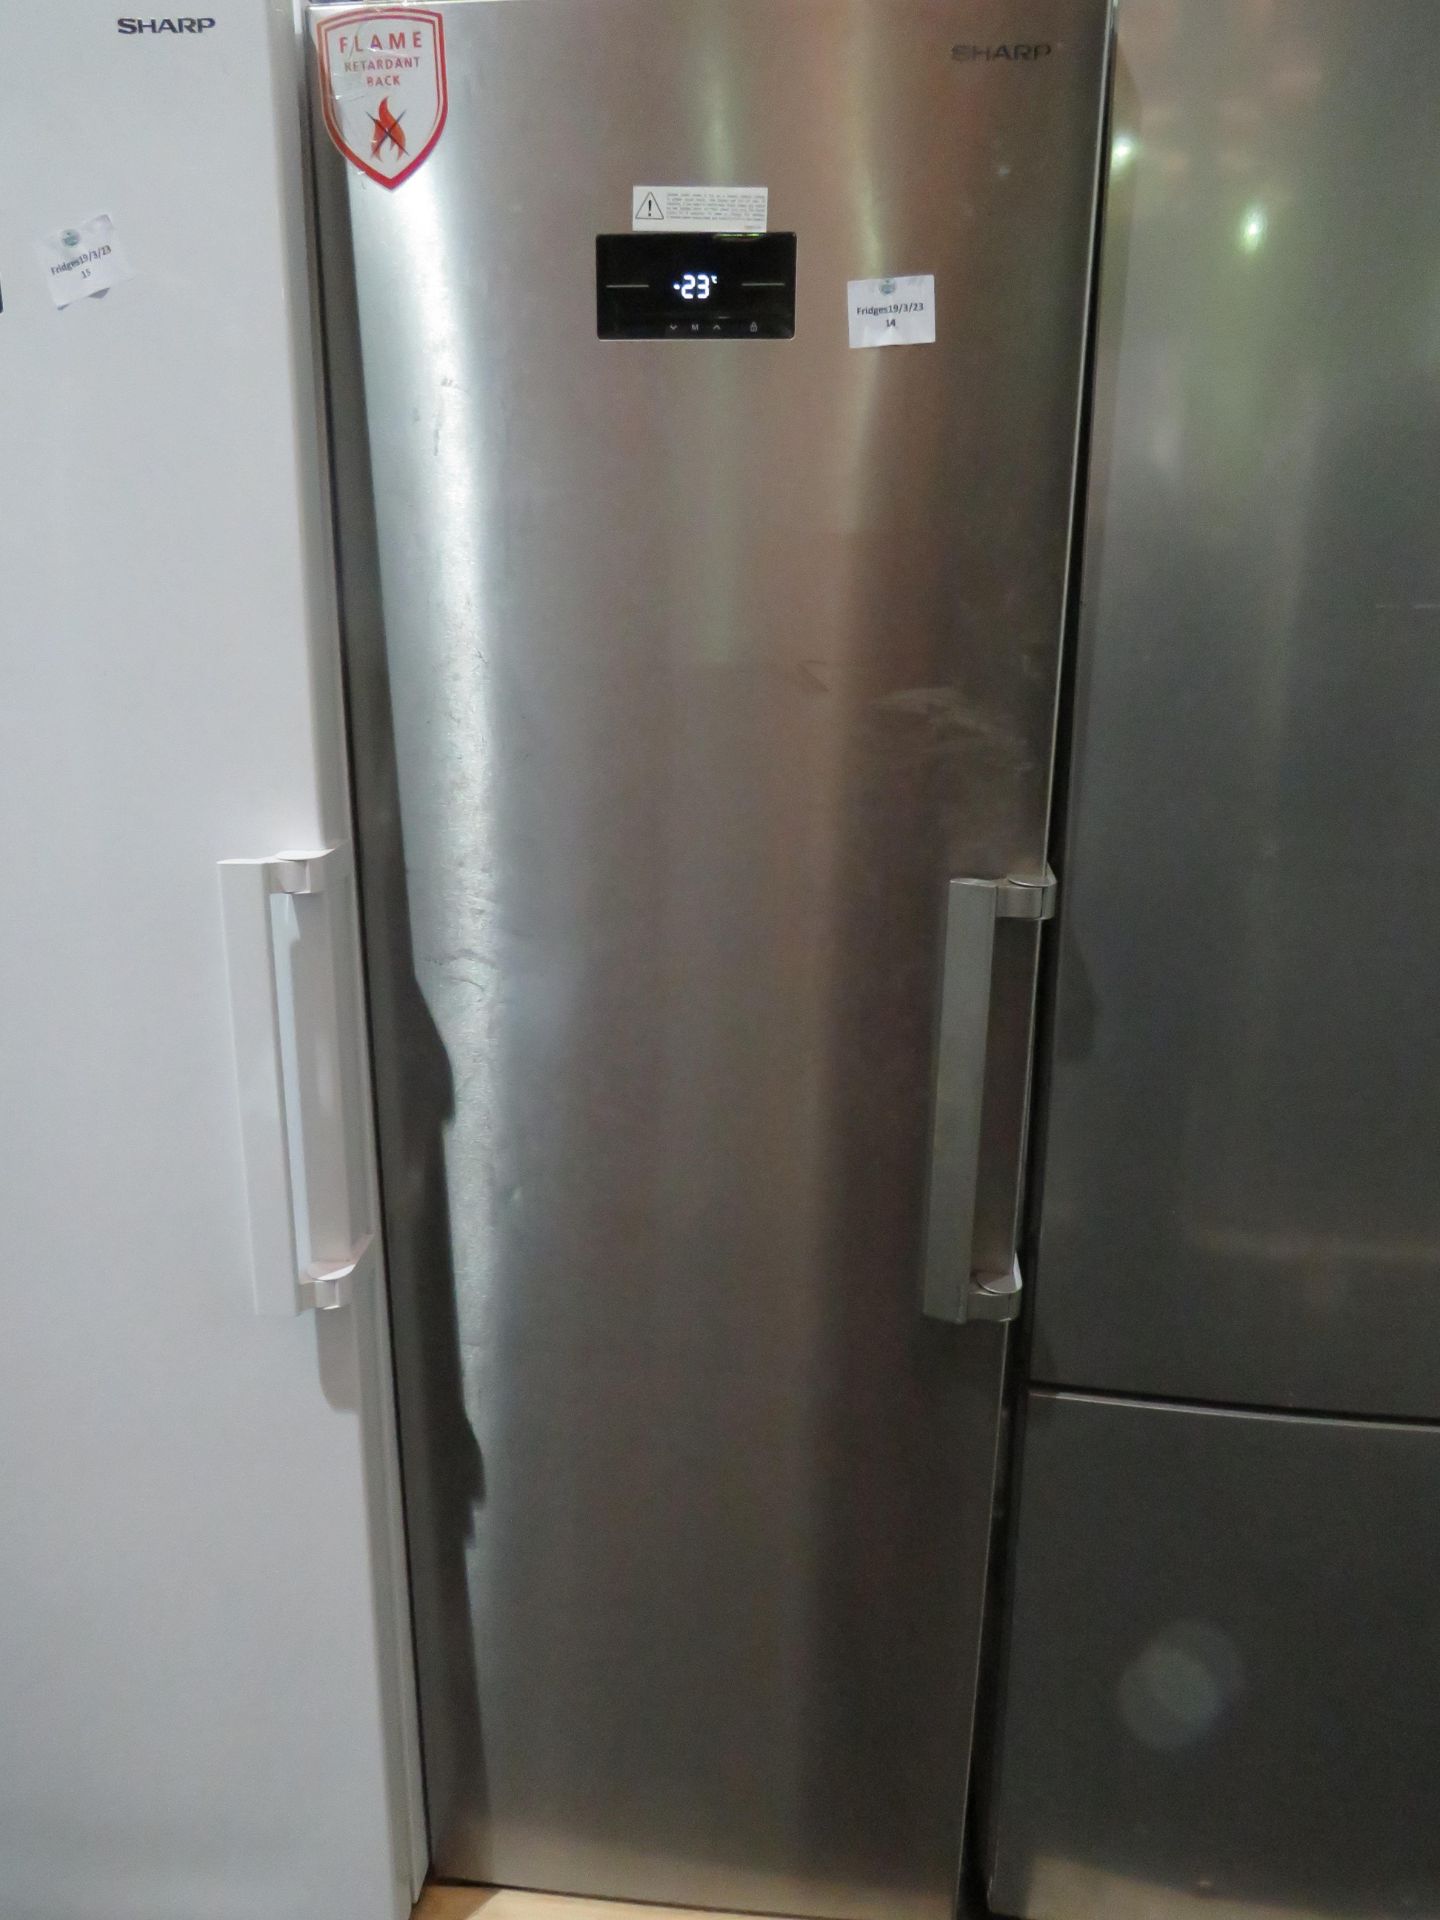 Sharp Stainless Steel Tall Freestanding Freezer - Tested Working & Needs a good clean Inside.